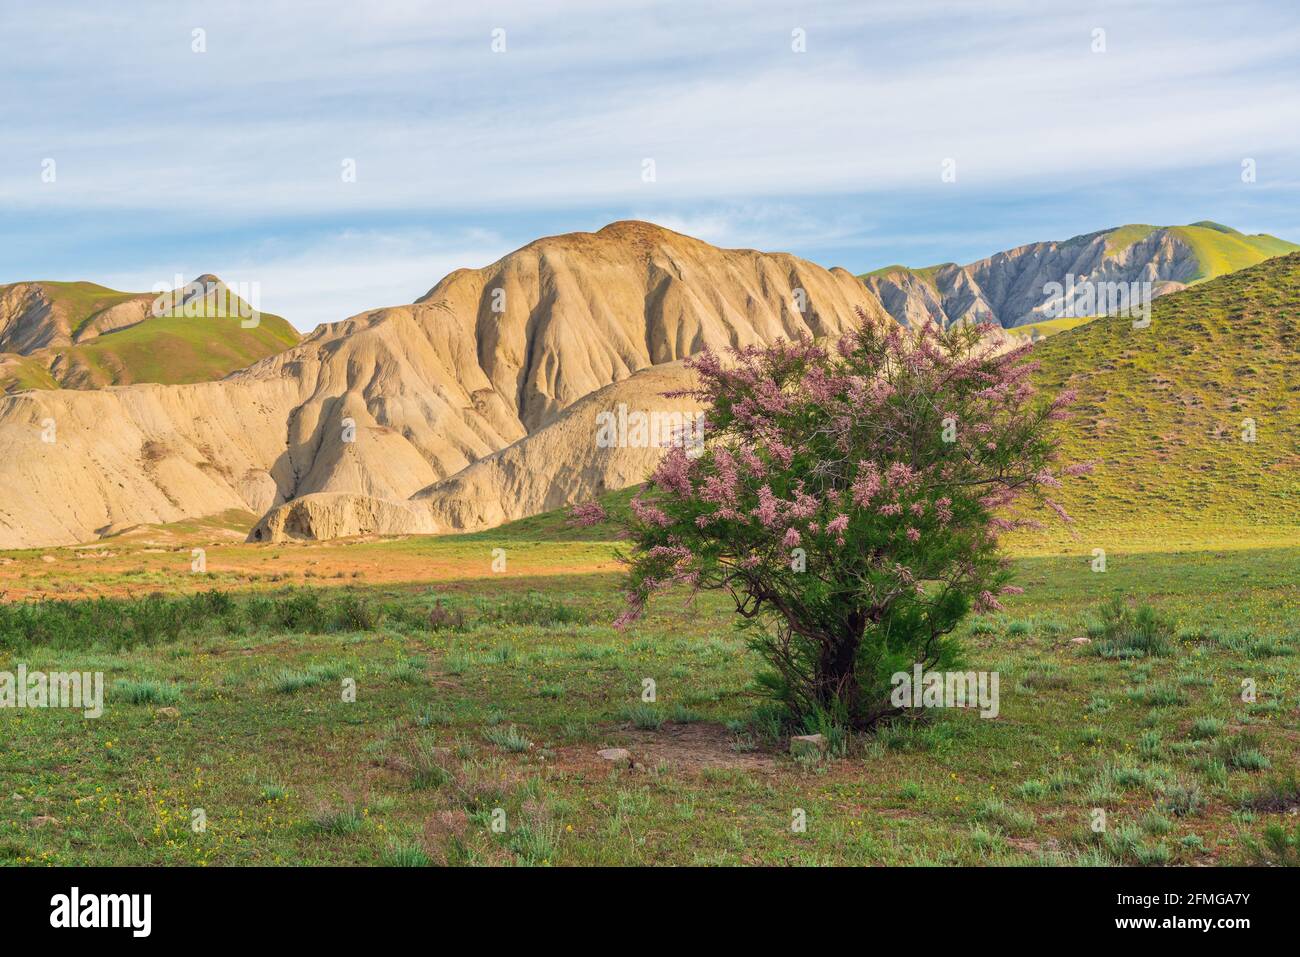 Blooming tamarix bushes in a mountain valley Stock Photo